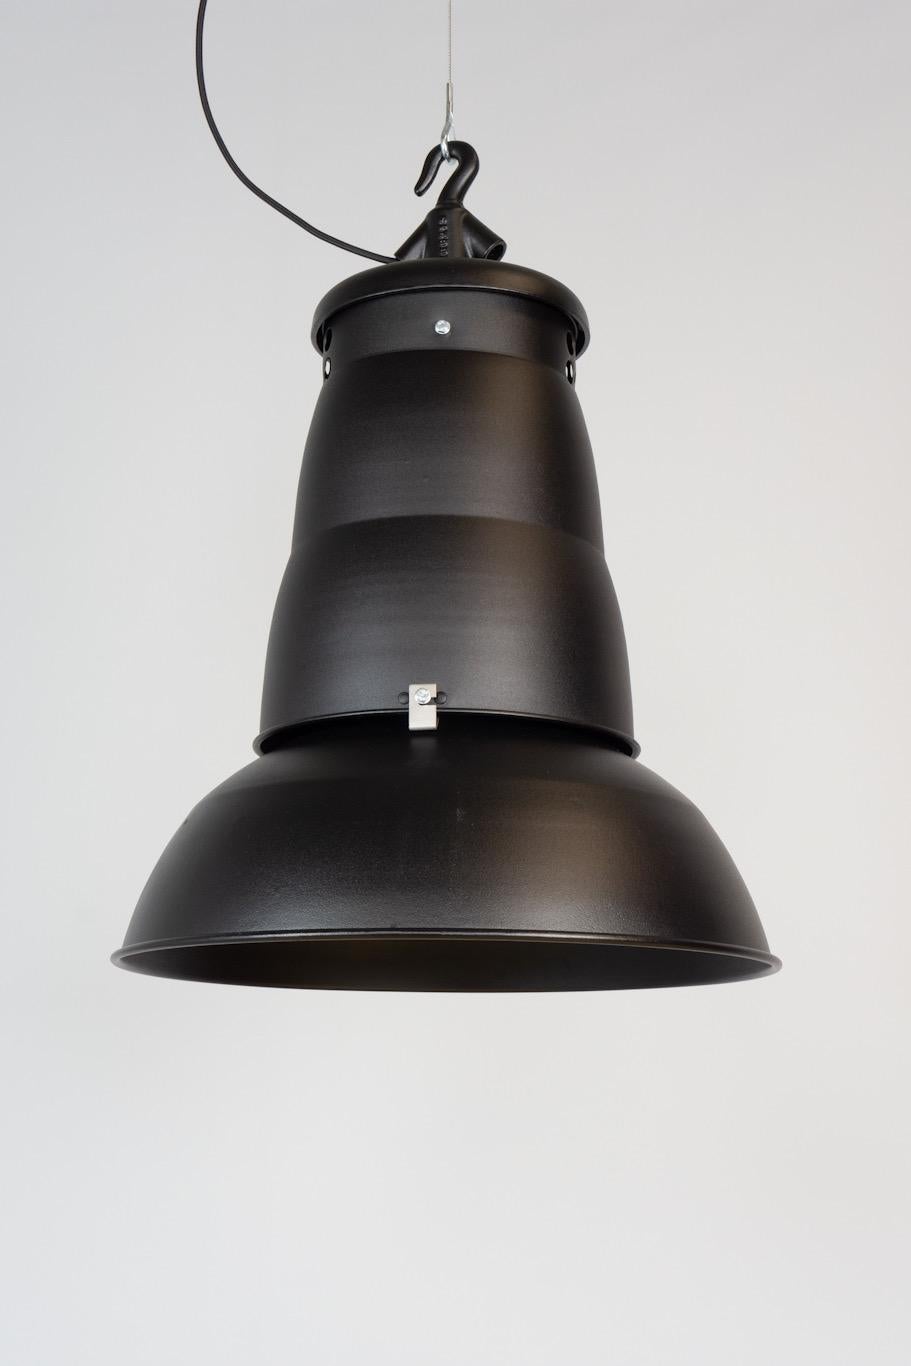 French Industrial Hanging Light Pendant Philips PHD400 Black Label Collection 1957 For Sale